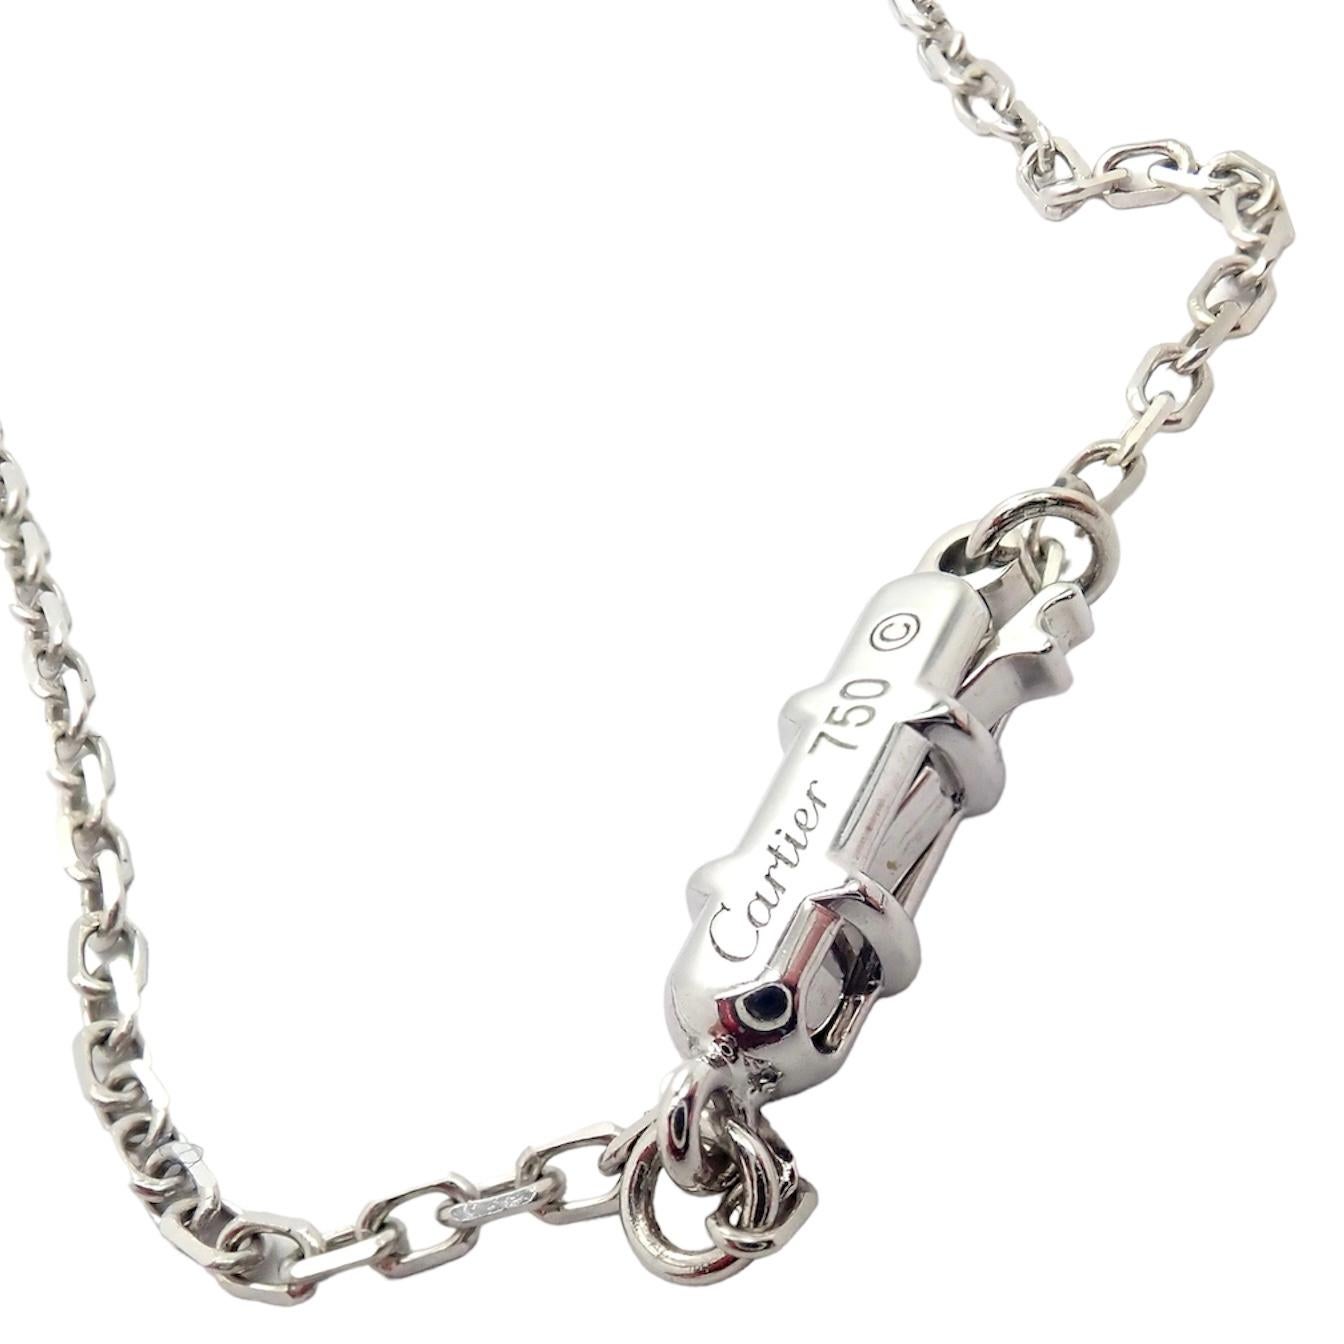 Cartier Diamond White Gold 8 Station Long Love Link Chain Necklace For Sale 2